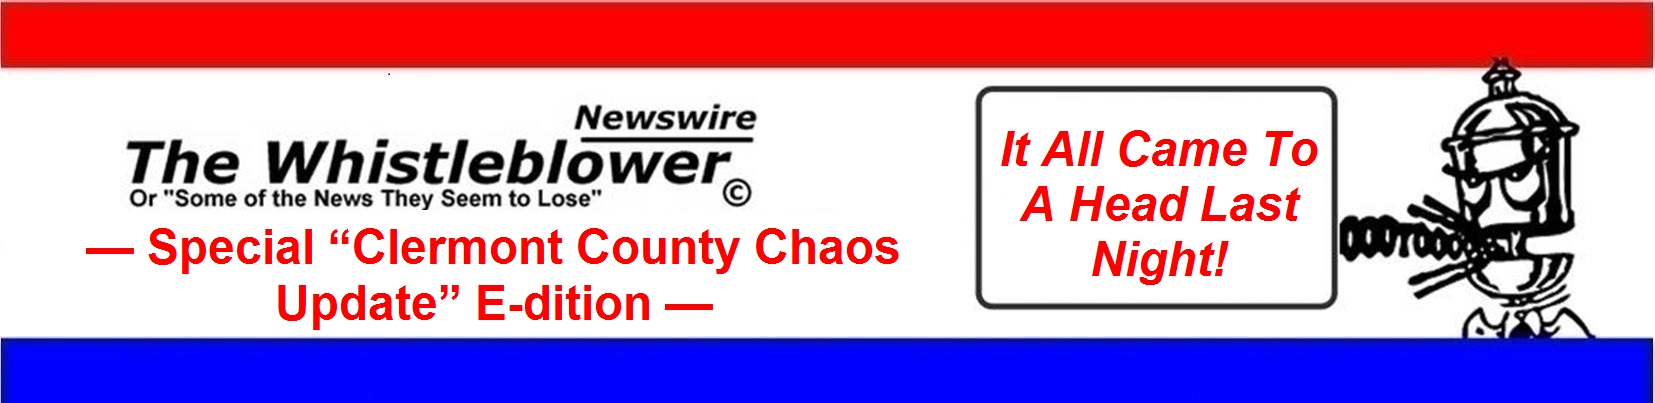 JAN 21 CLERMONT COUNTY CHAOS UPDATE